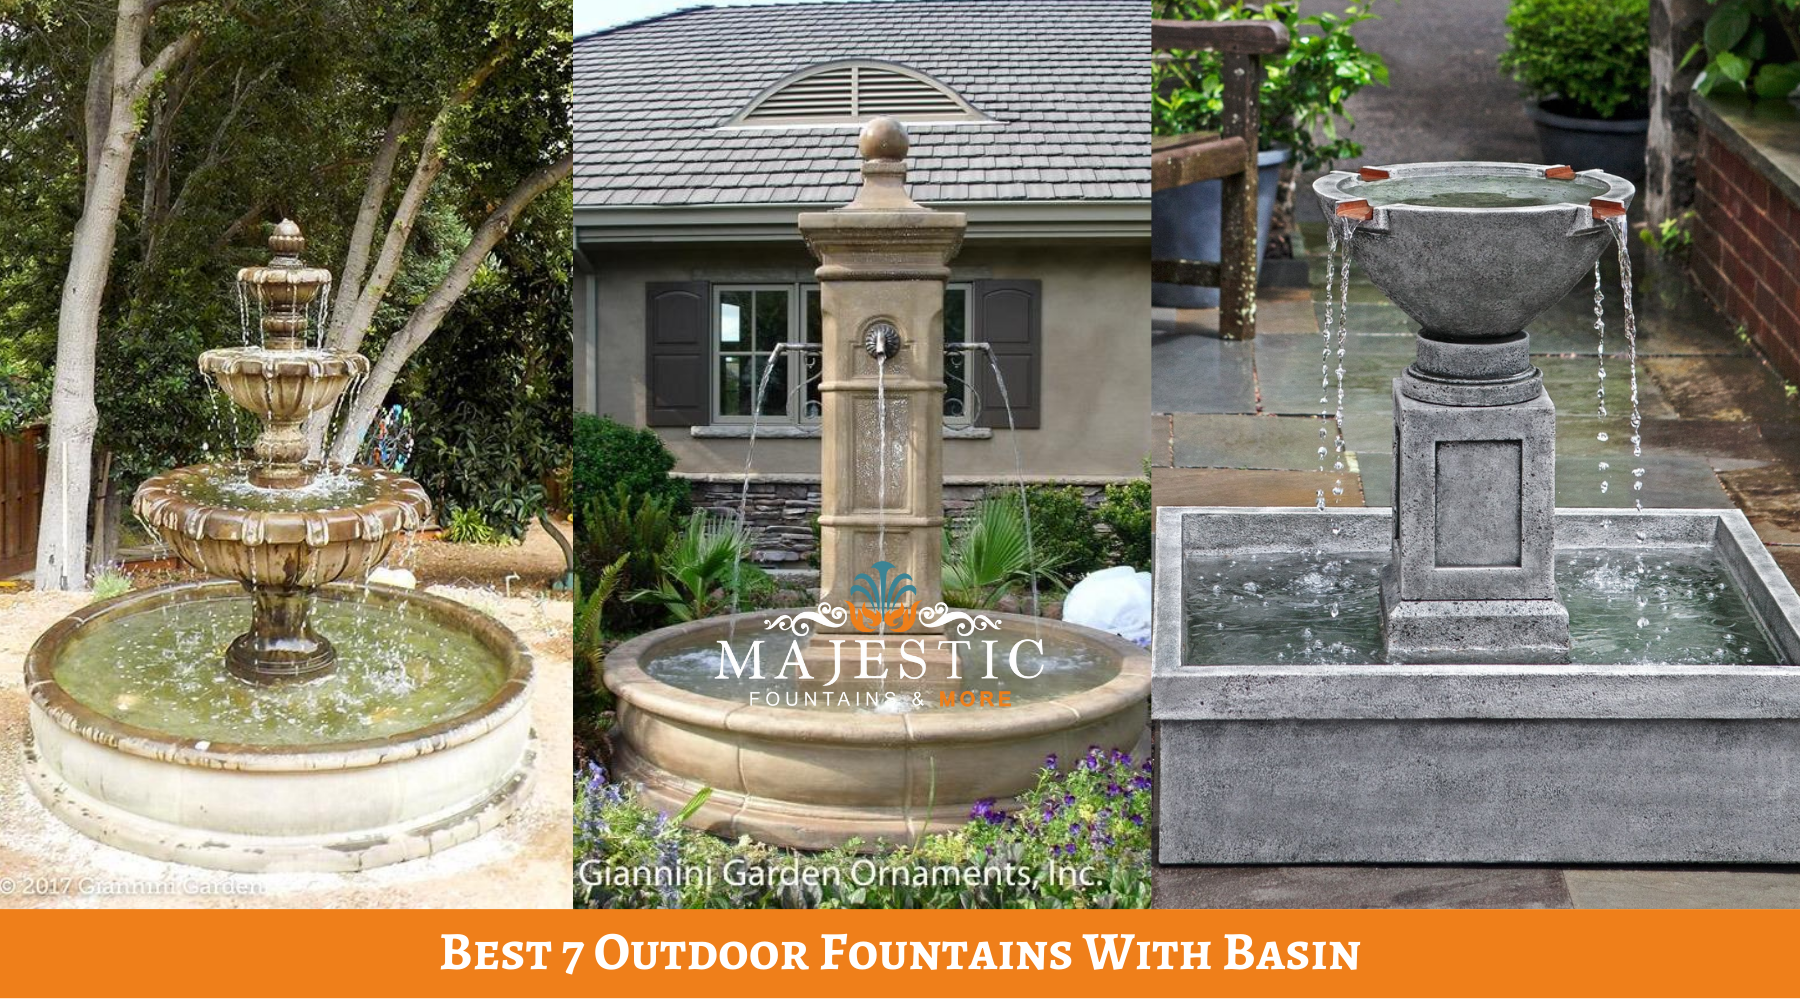 Best 7 Outdoor Fountains With Basin